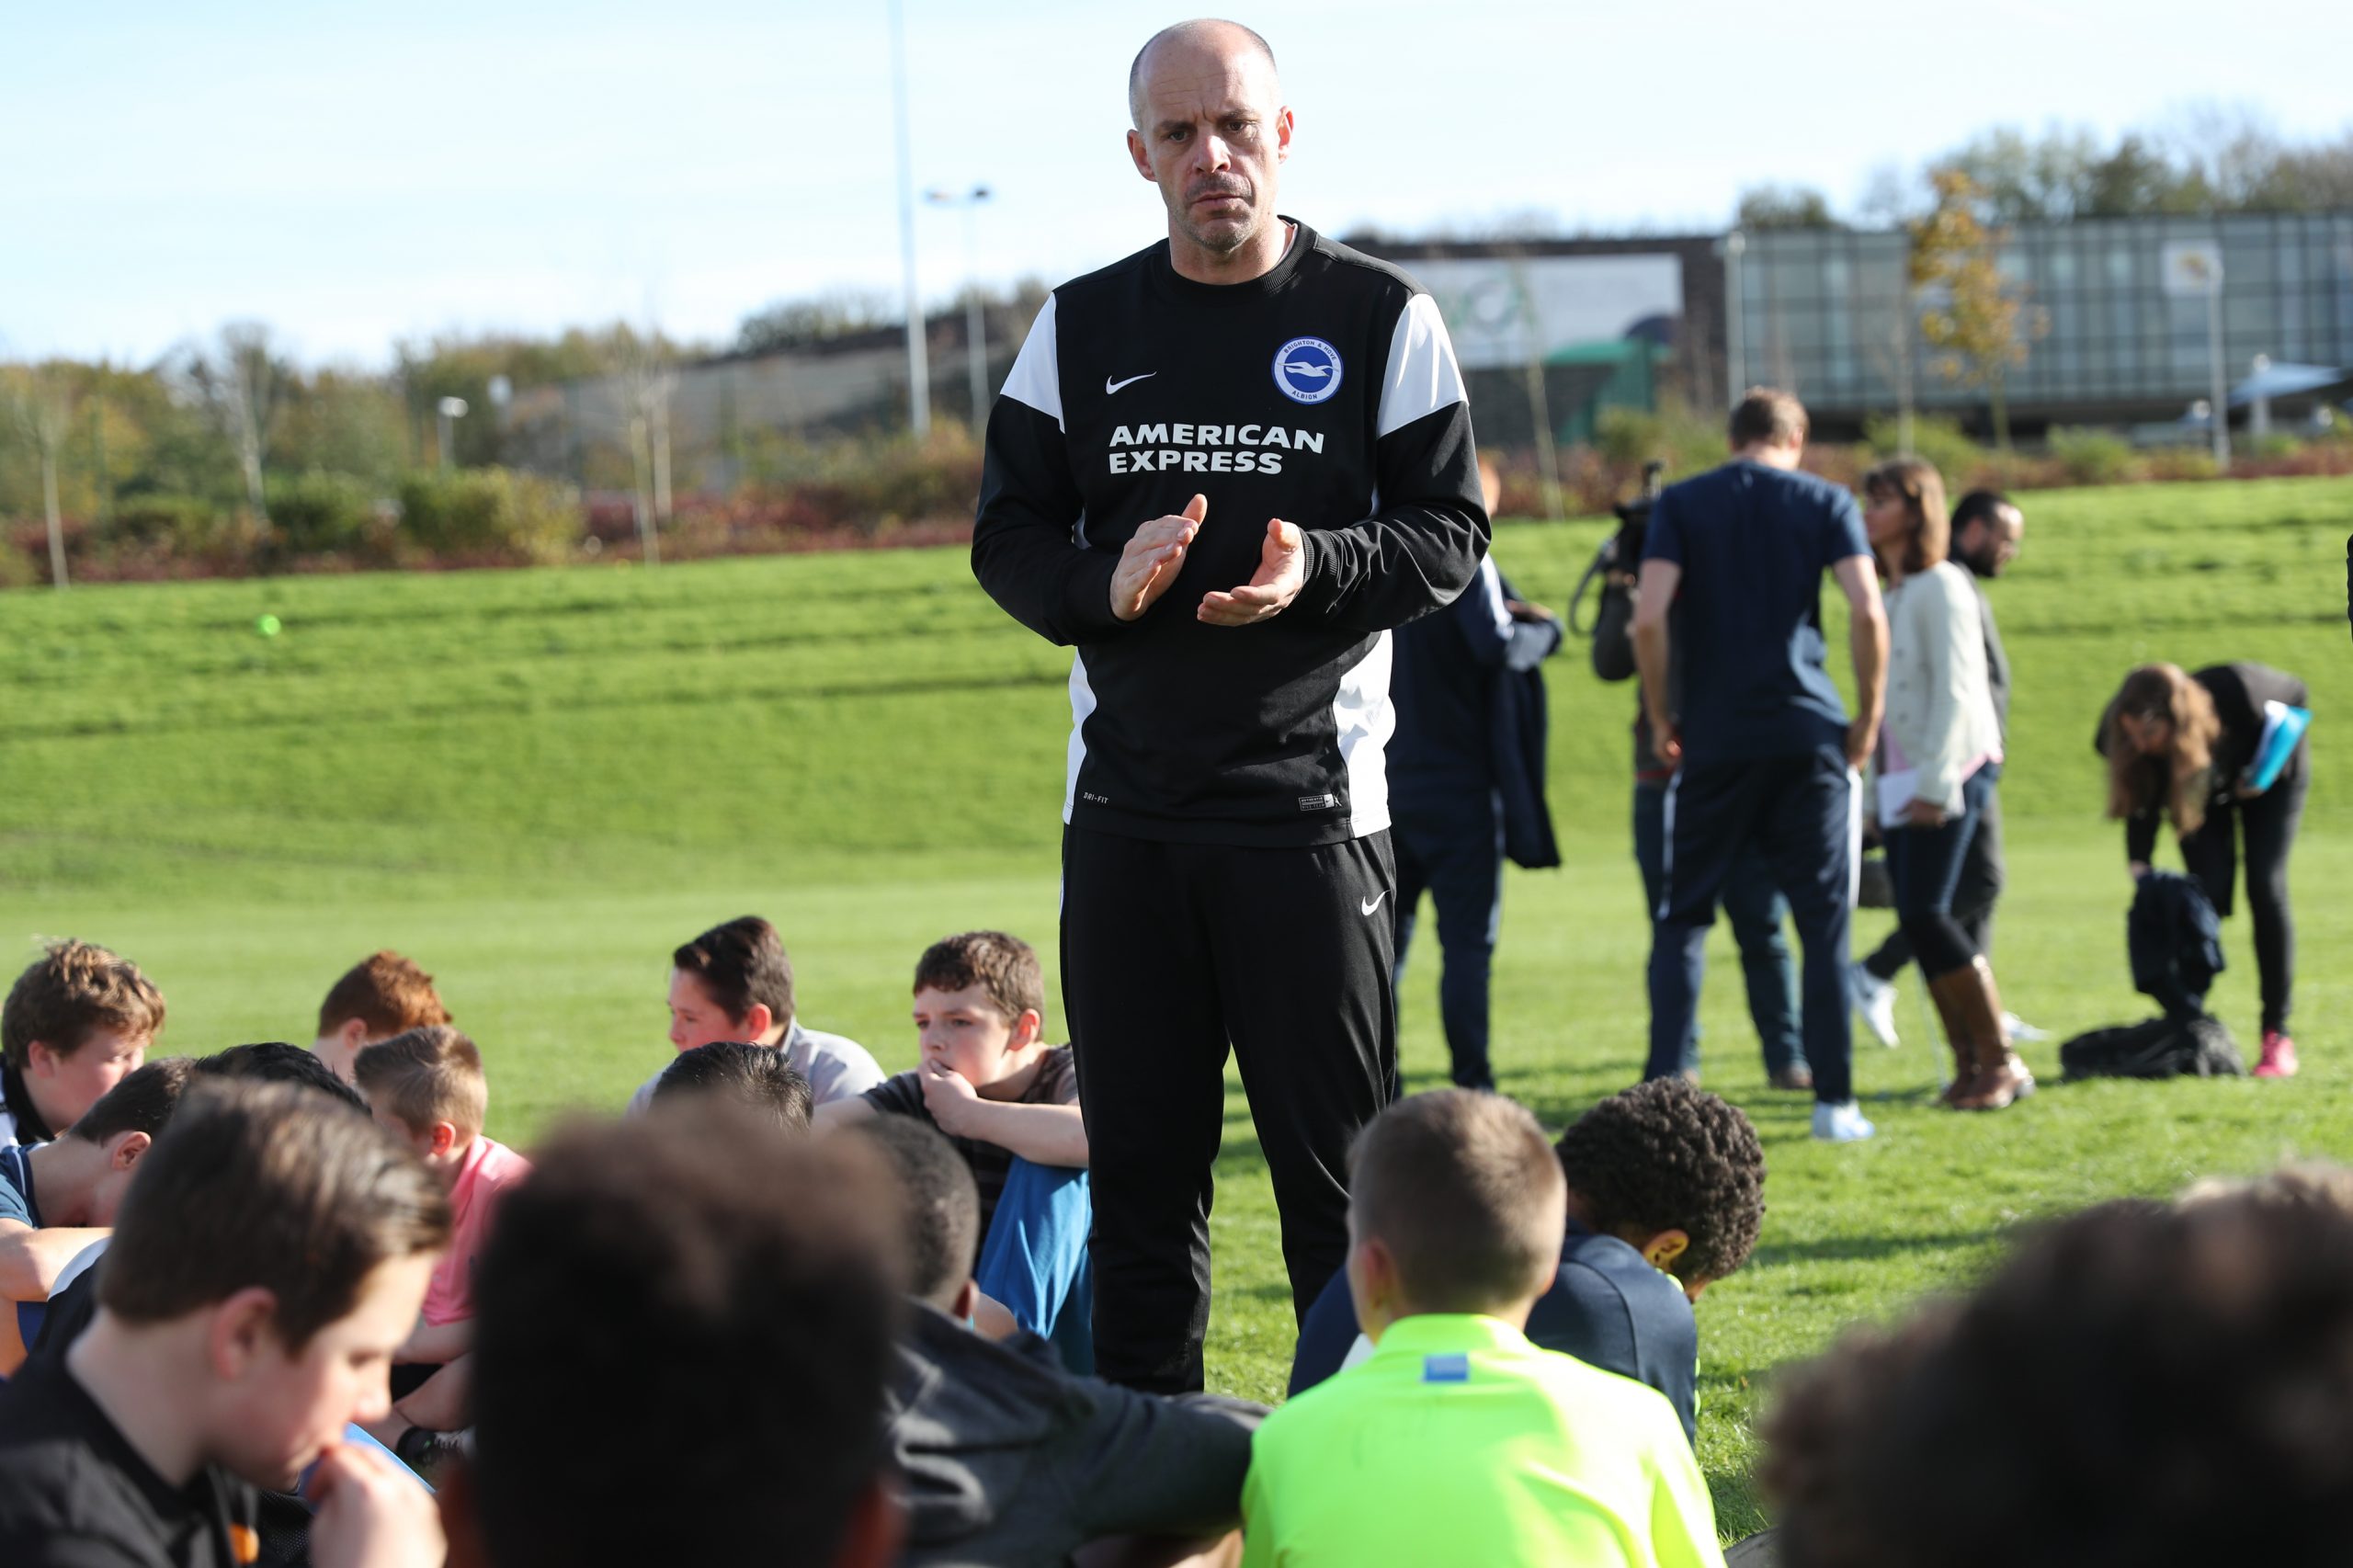 AITC working with Sussex Police to turn young lives around